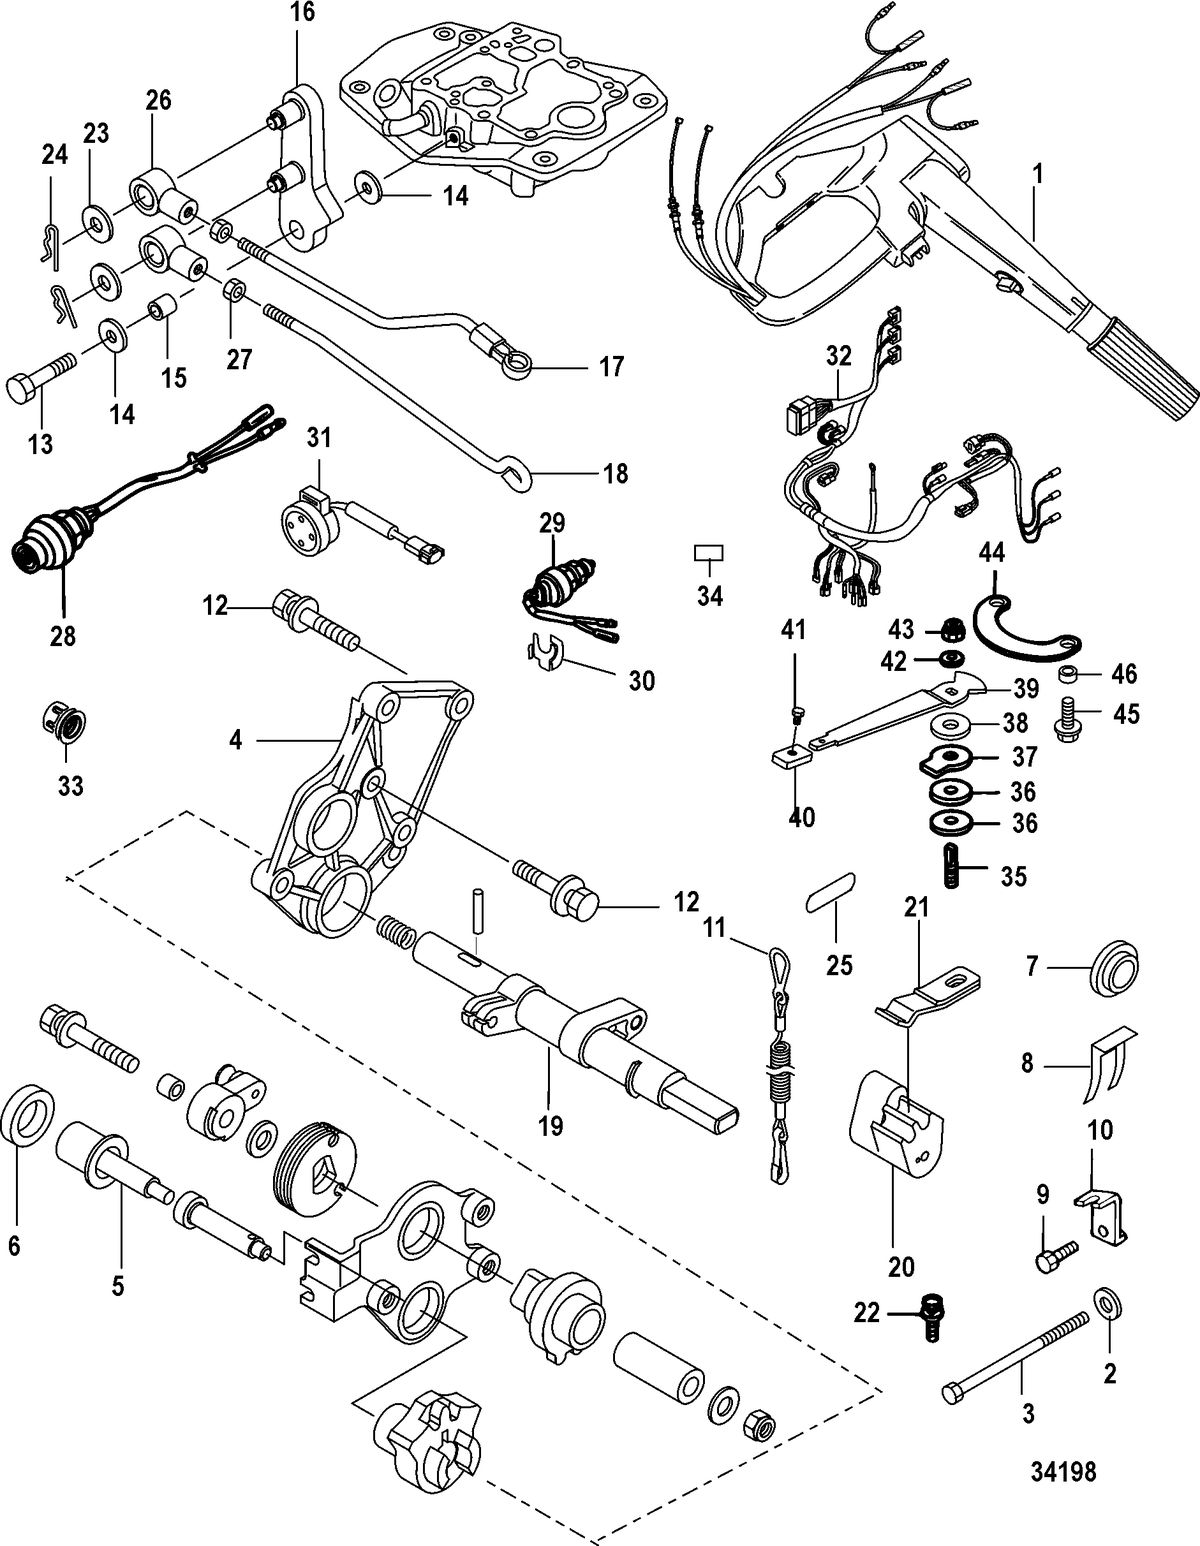 ACCESSORIES STEERING SYSTEMS AND COMPONENTS Conversion Kit-Tiller Handle, Electric - 879147A09